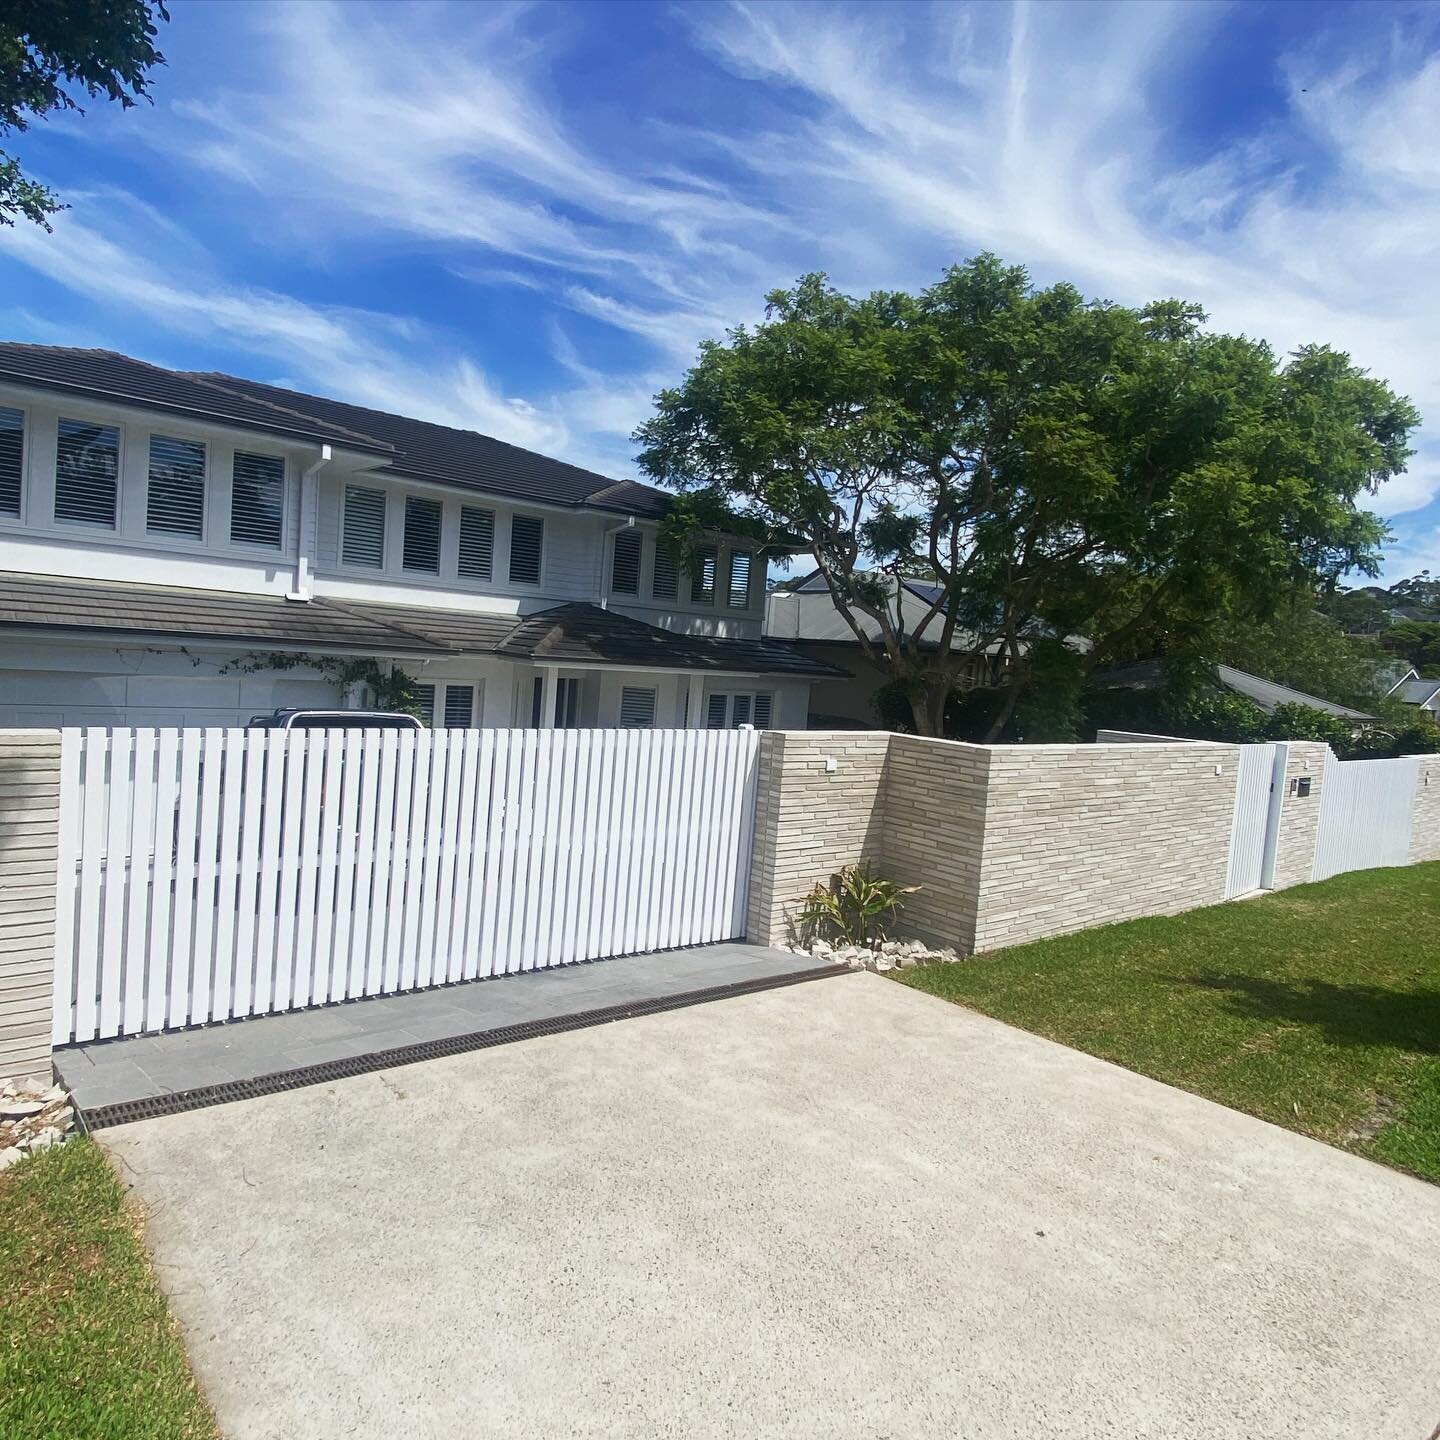 Another one of our recently completed projects handed over in time for the Christmas break!
⠀
New front fence, entry gate and driveway gate built for our repeat client @nswdesignconstruction ⠀
⠀
We also built a custom bench seat to compliment the new